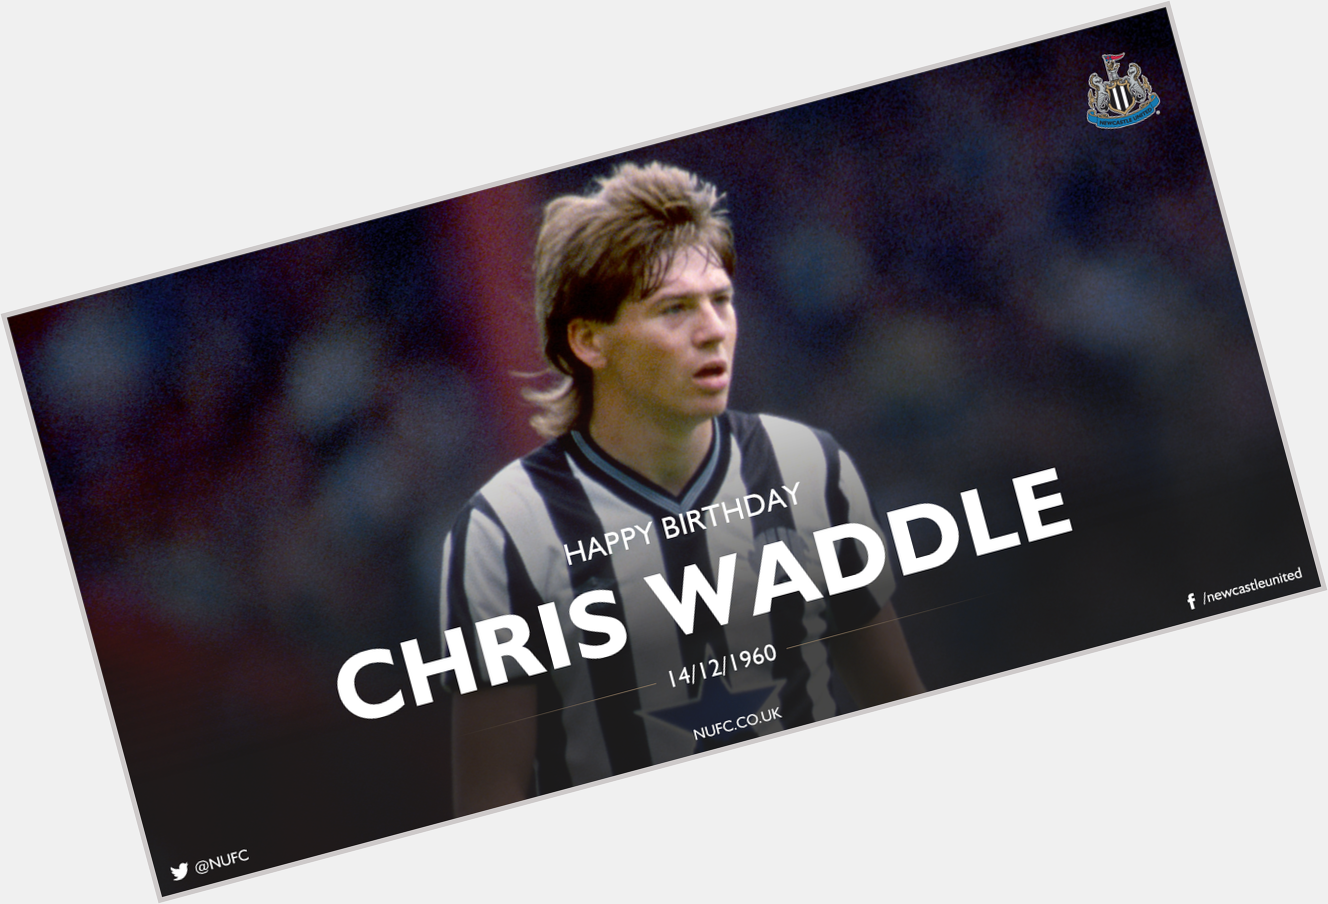 Happy birthday to former Newcastle United midfielder Chris Waddle, who turns 55 today. 